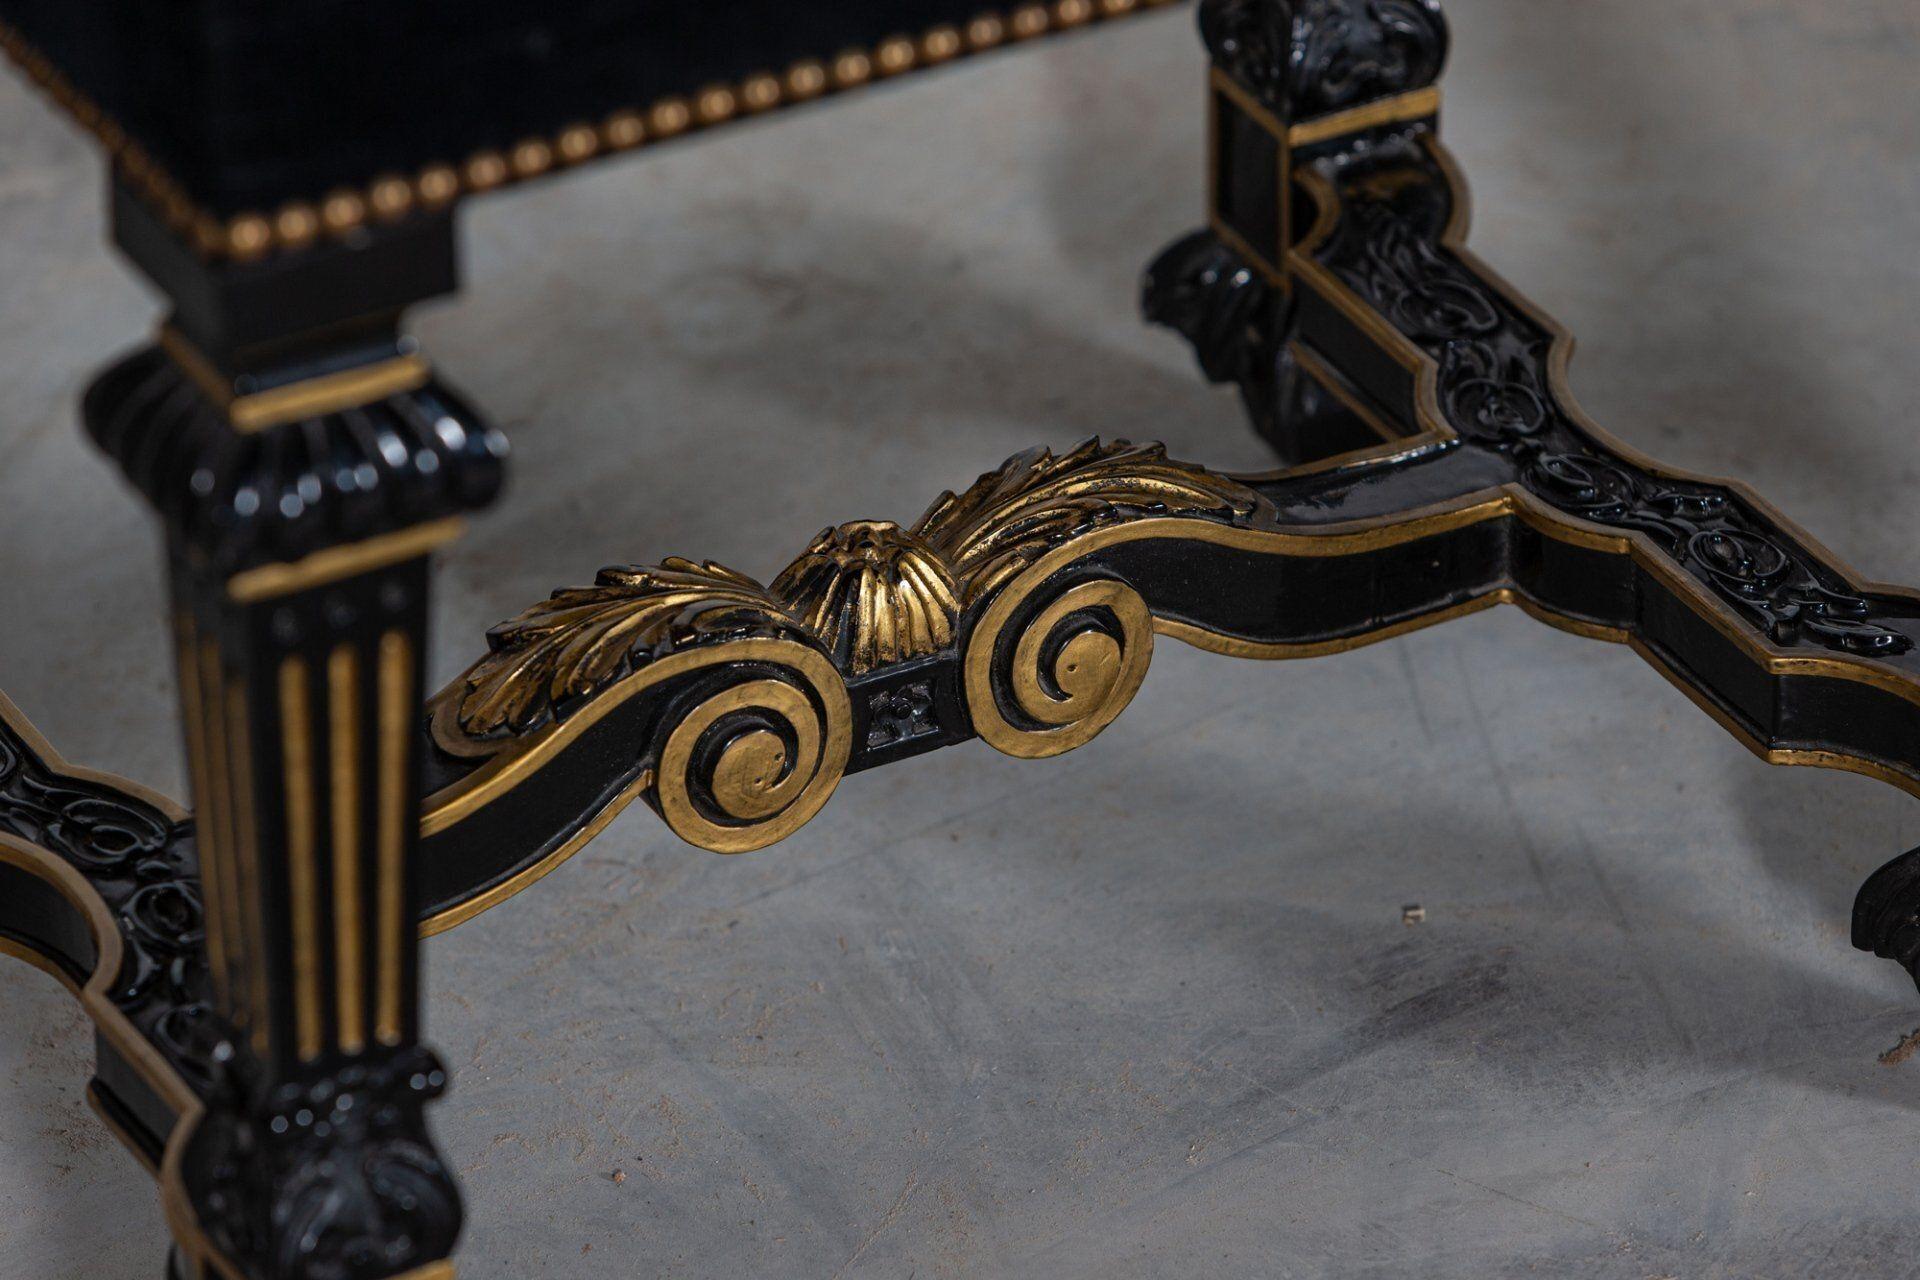 Circa 1870.
Pair French 19th C ebonised & gilt velvet stools.
Exceptional examples.
Sku 1131
Measures: W52 x D40 x H62cm.